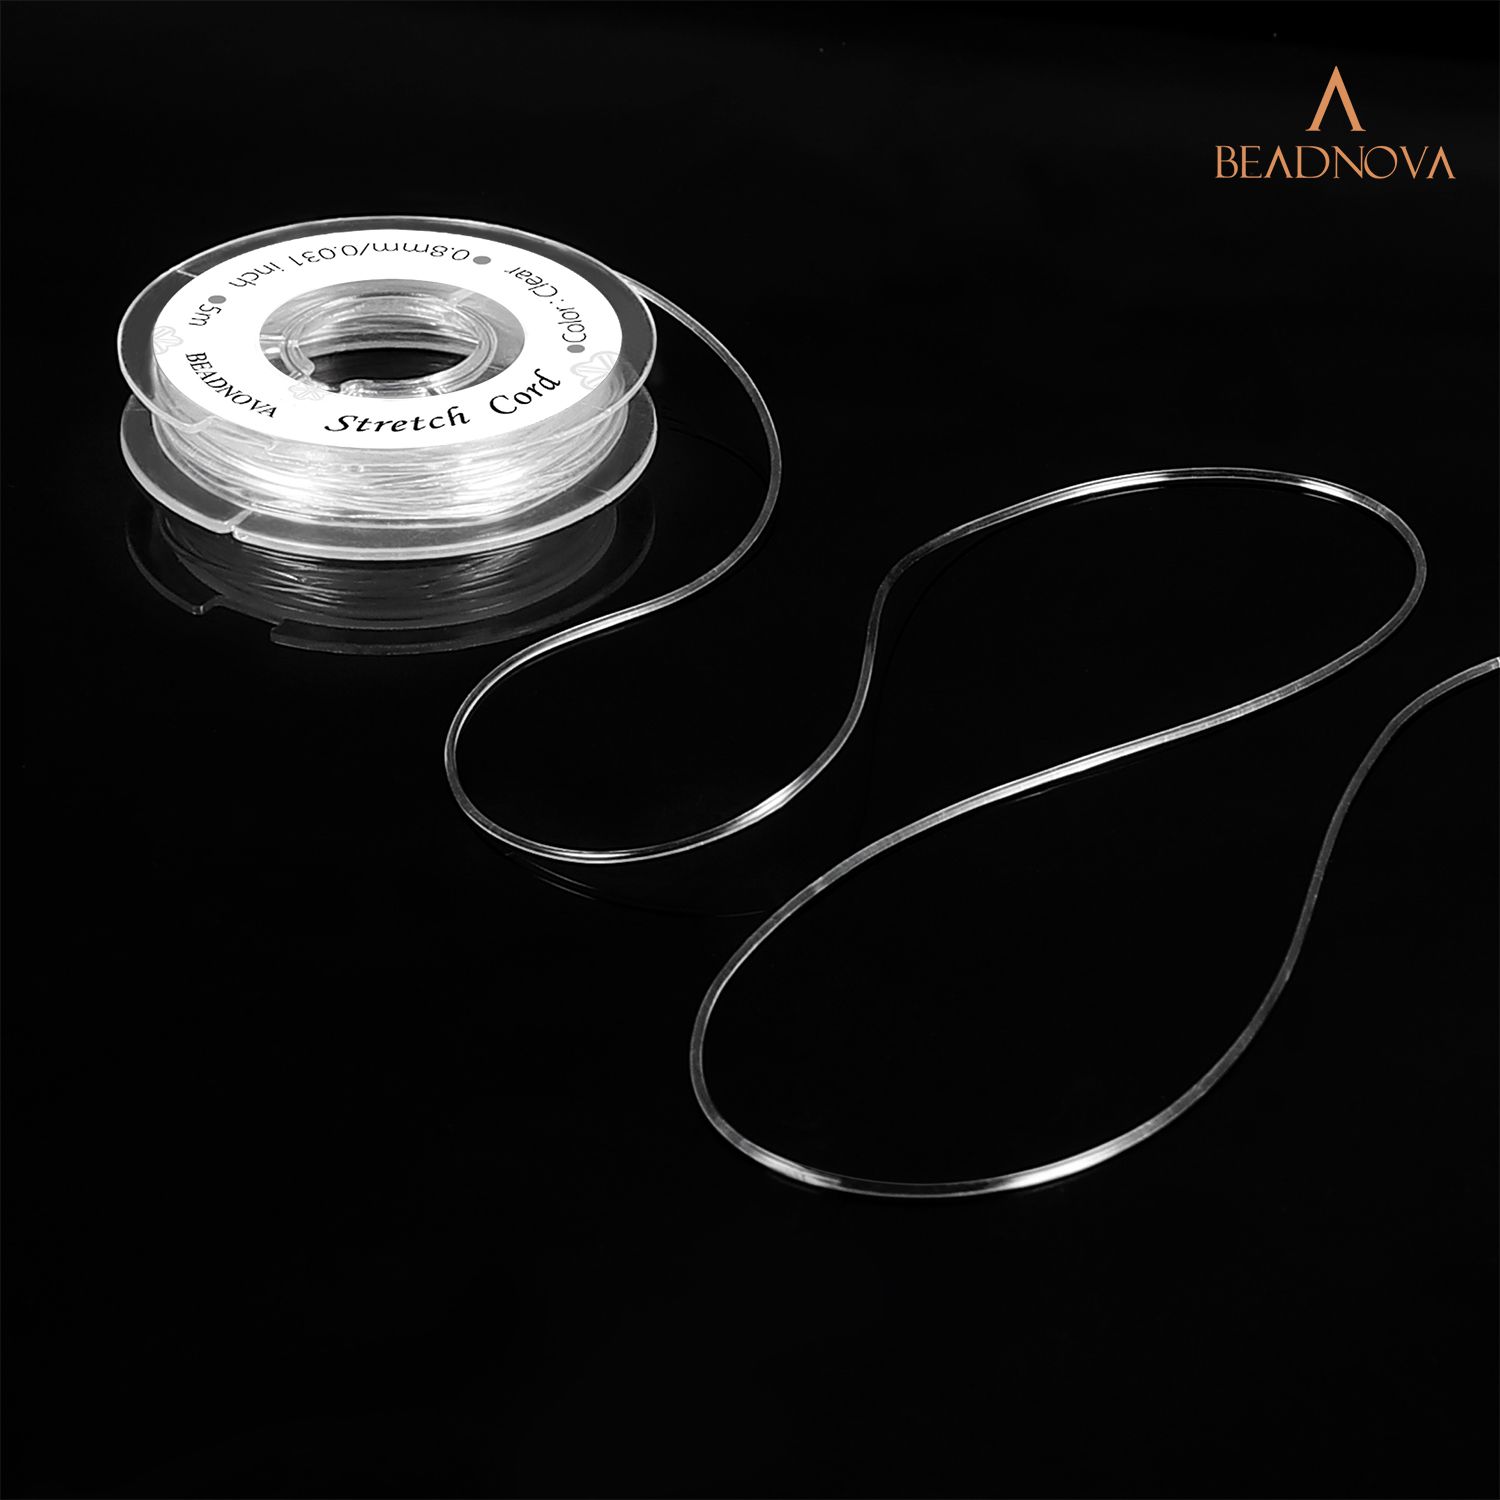  BEADNOVA 1mm Elastic Stretch Crystal String Cord for Jewelry  Making Bracelet Beading Thread (12m/ Roll, Total 10 Rolls Mixed Color) :  Arts, Crafts & Sewing